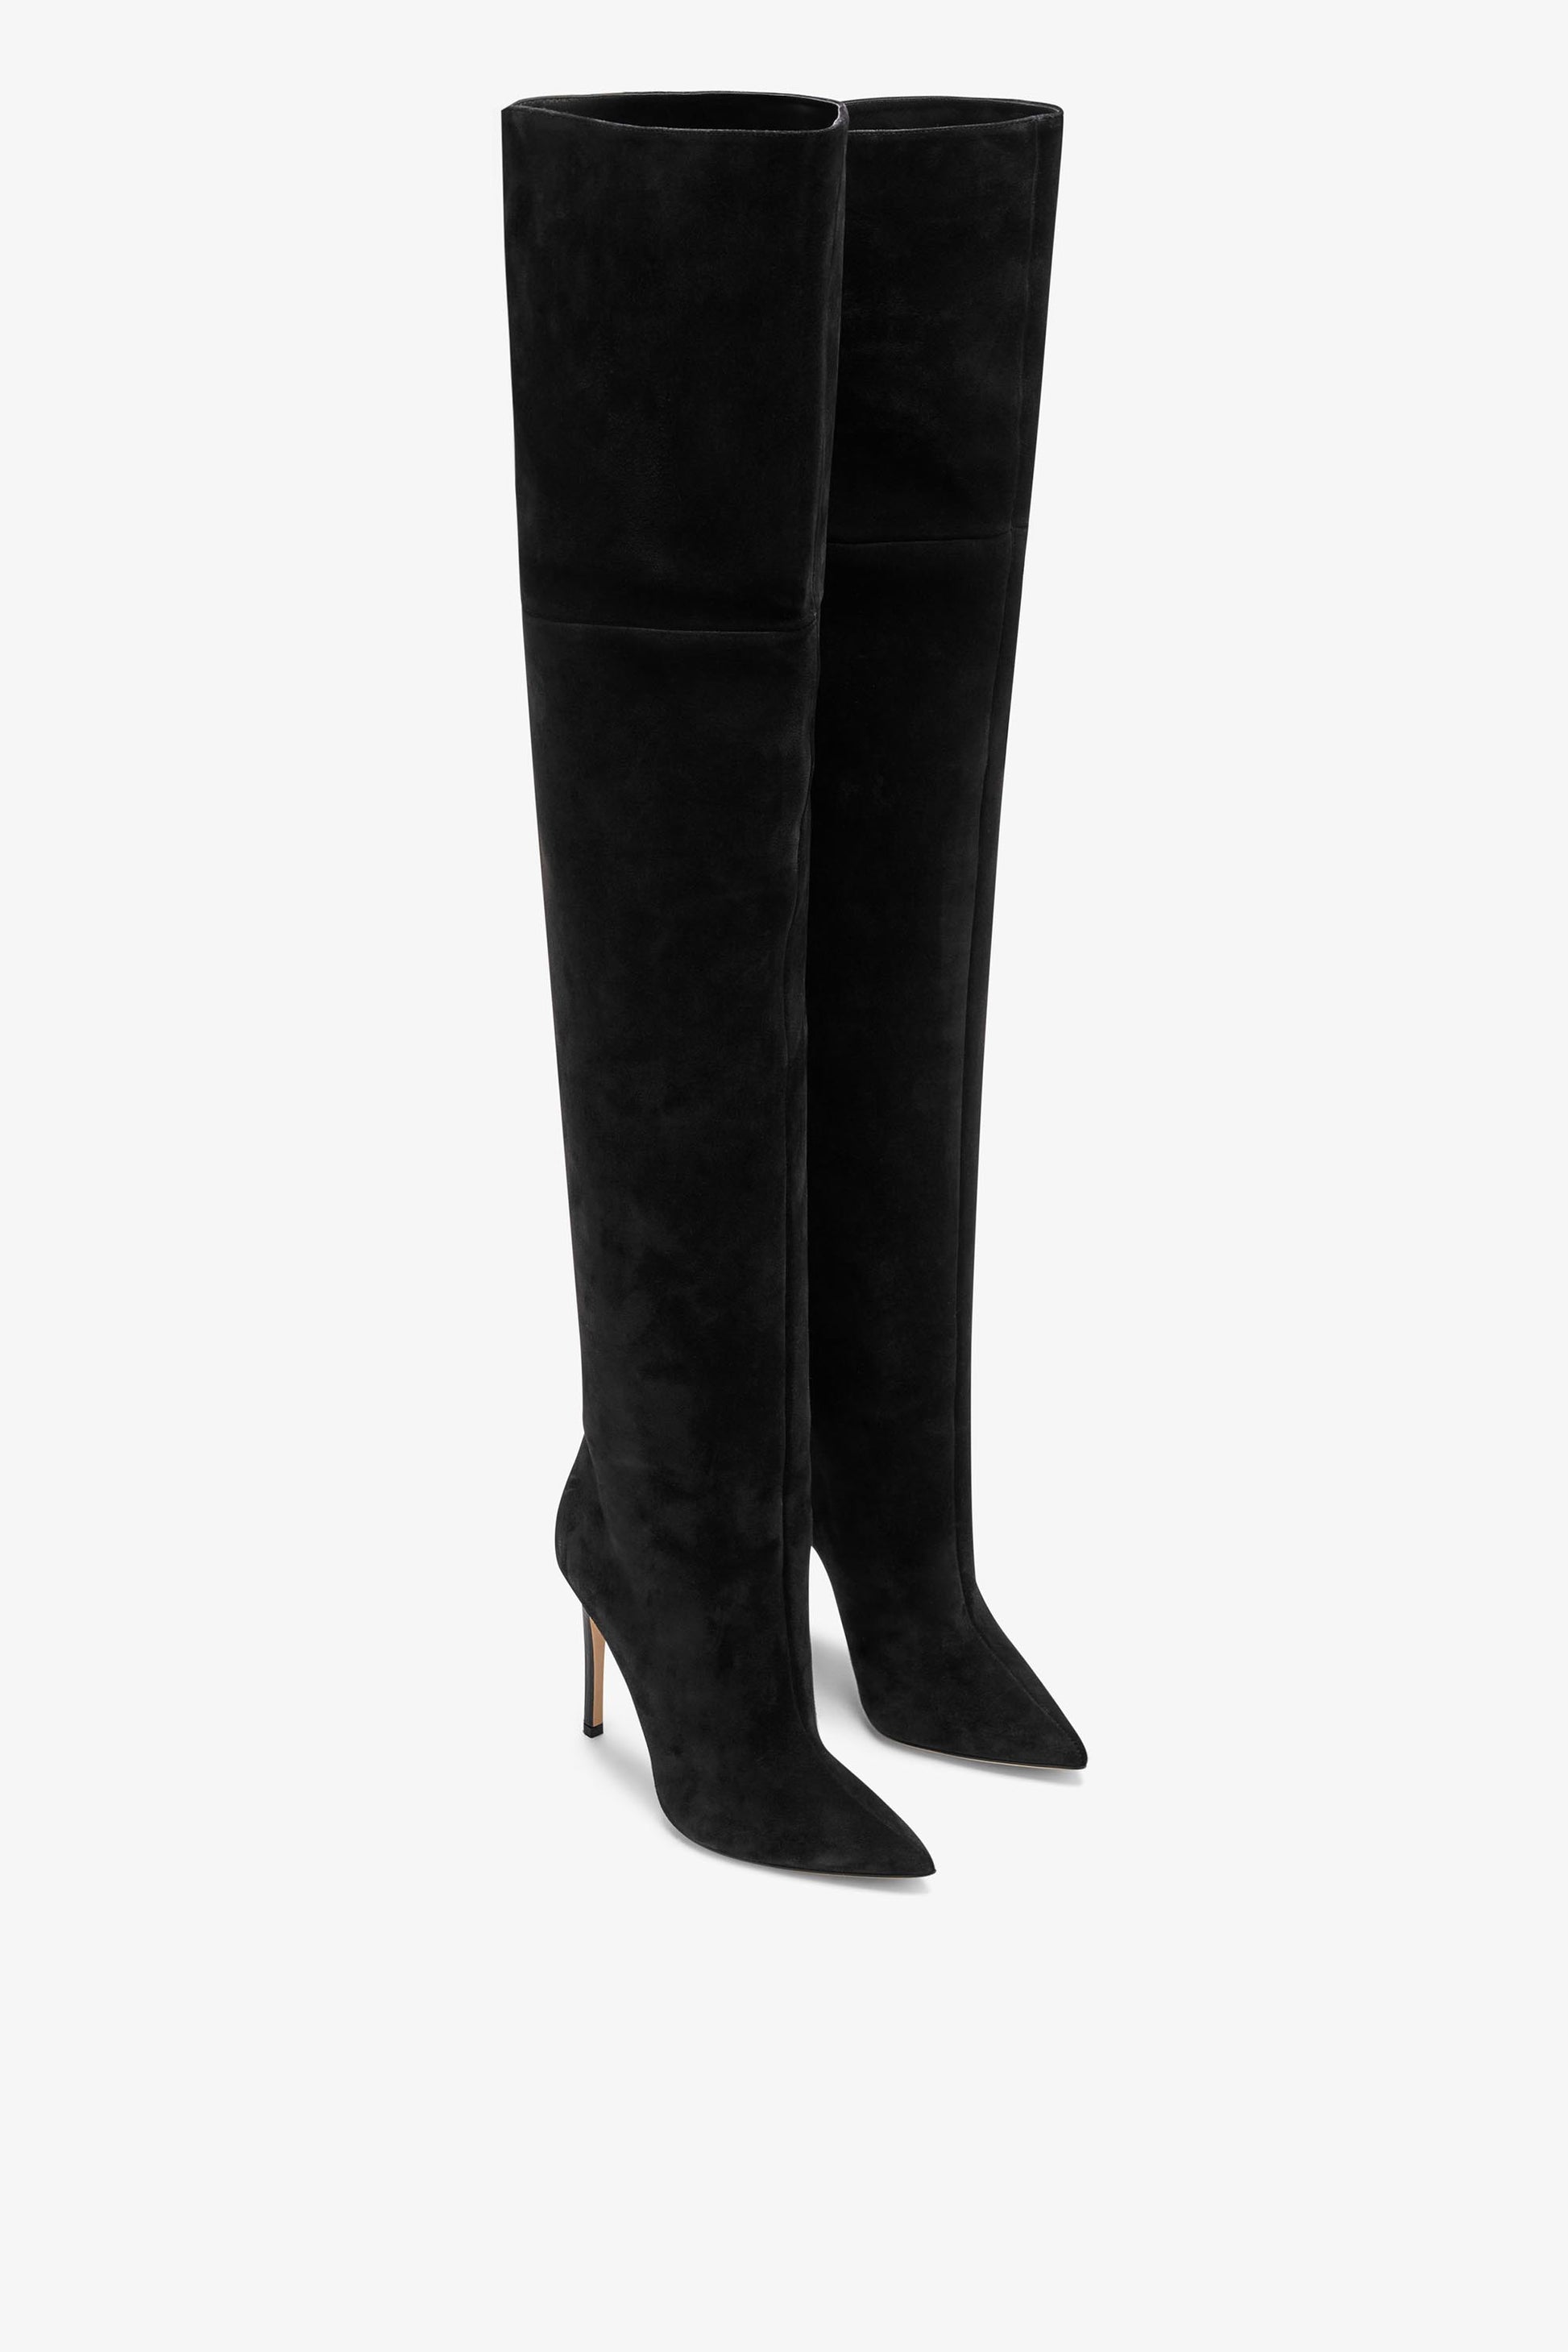 Black calf suede over the knee boots